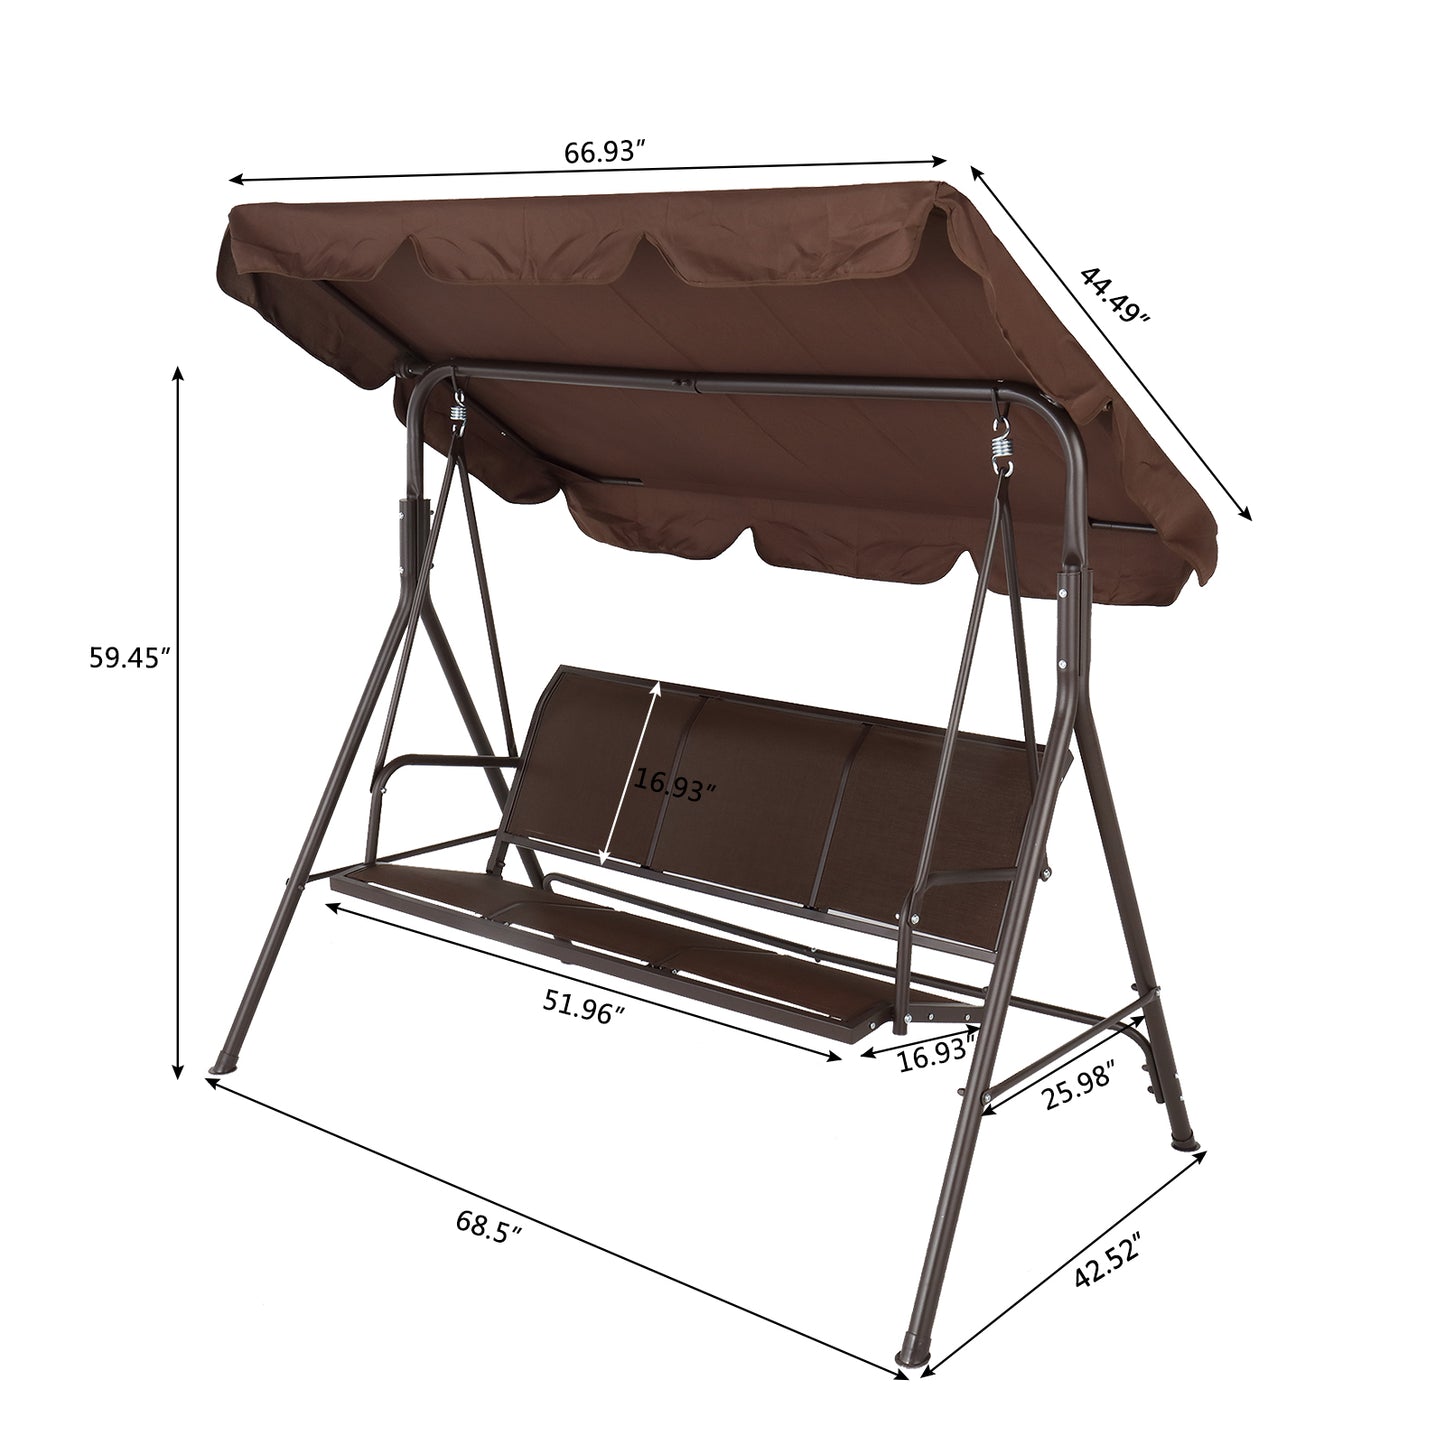 3 Person Outdoor Patio Swing Seat with Adjustable Canopy, All Weather Resistant Hammock Swing Chair W/ Removable Cushions, High Load-Bearing Sunshade Swing for Patio Garden Pool Balcony